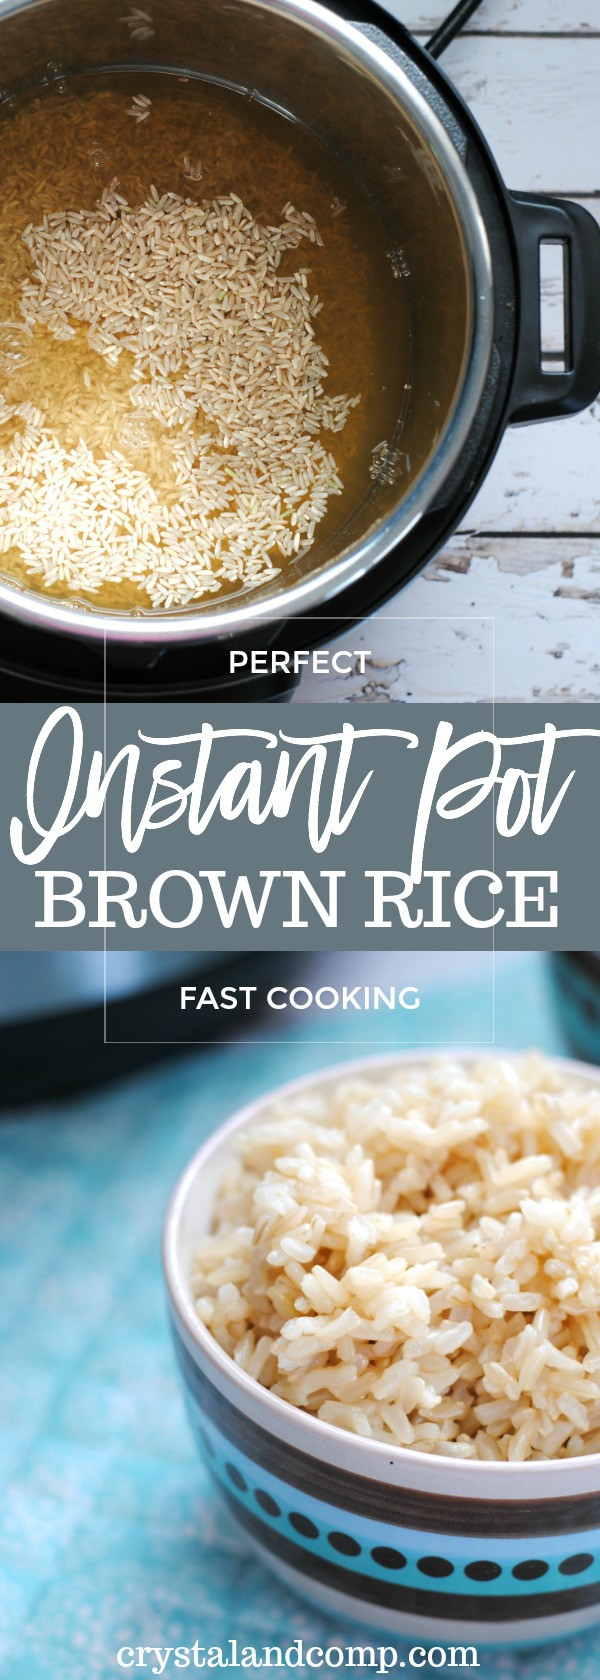 Brown Rice In Instant Pot
 How to Make Brown Rice in the Instant Pot